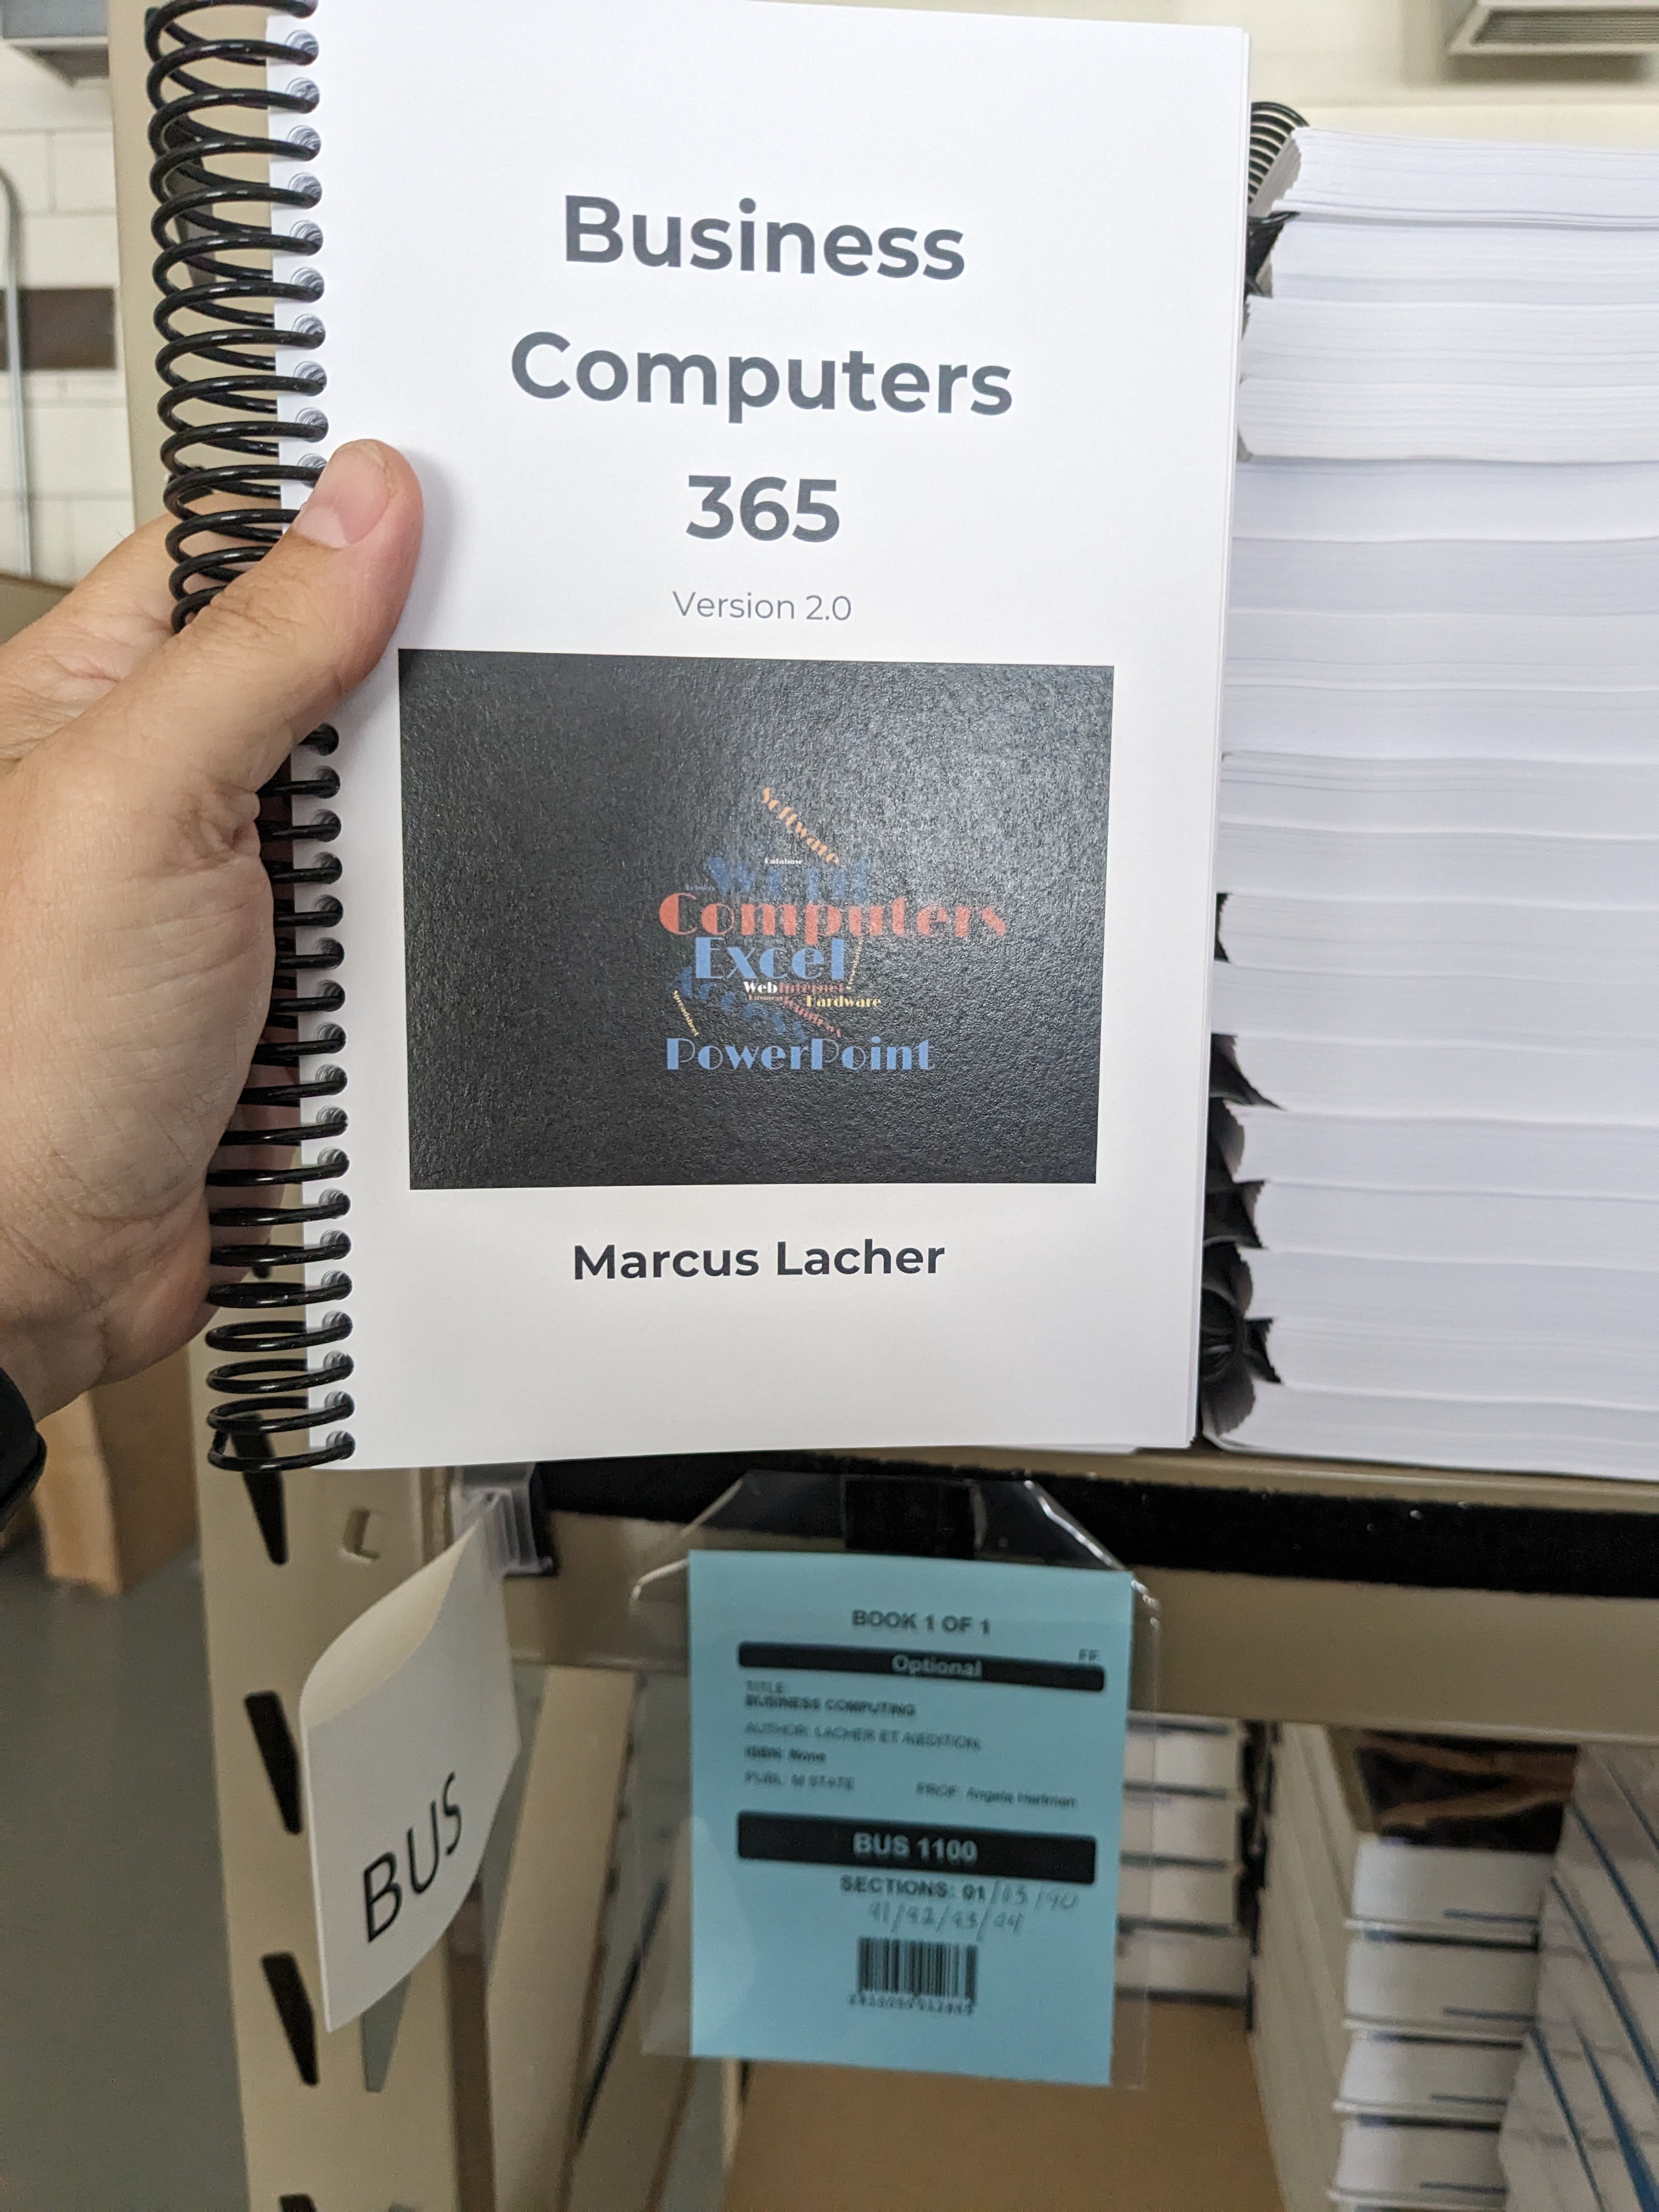 Business Computers 365 textbook Version 2.0